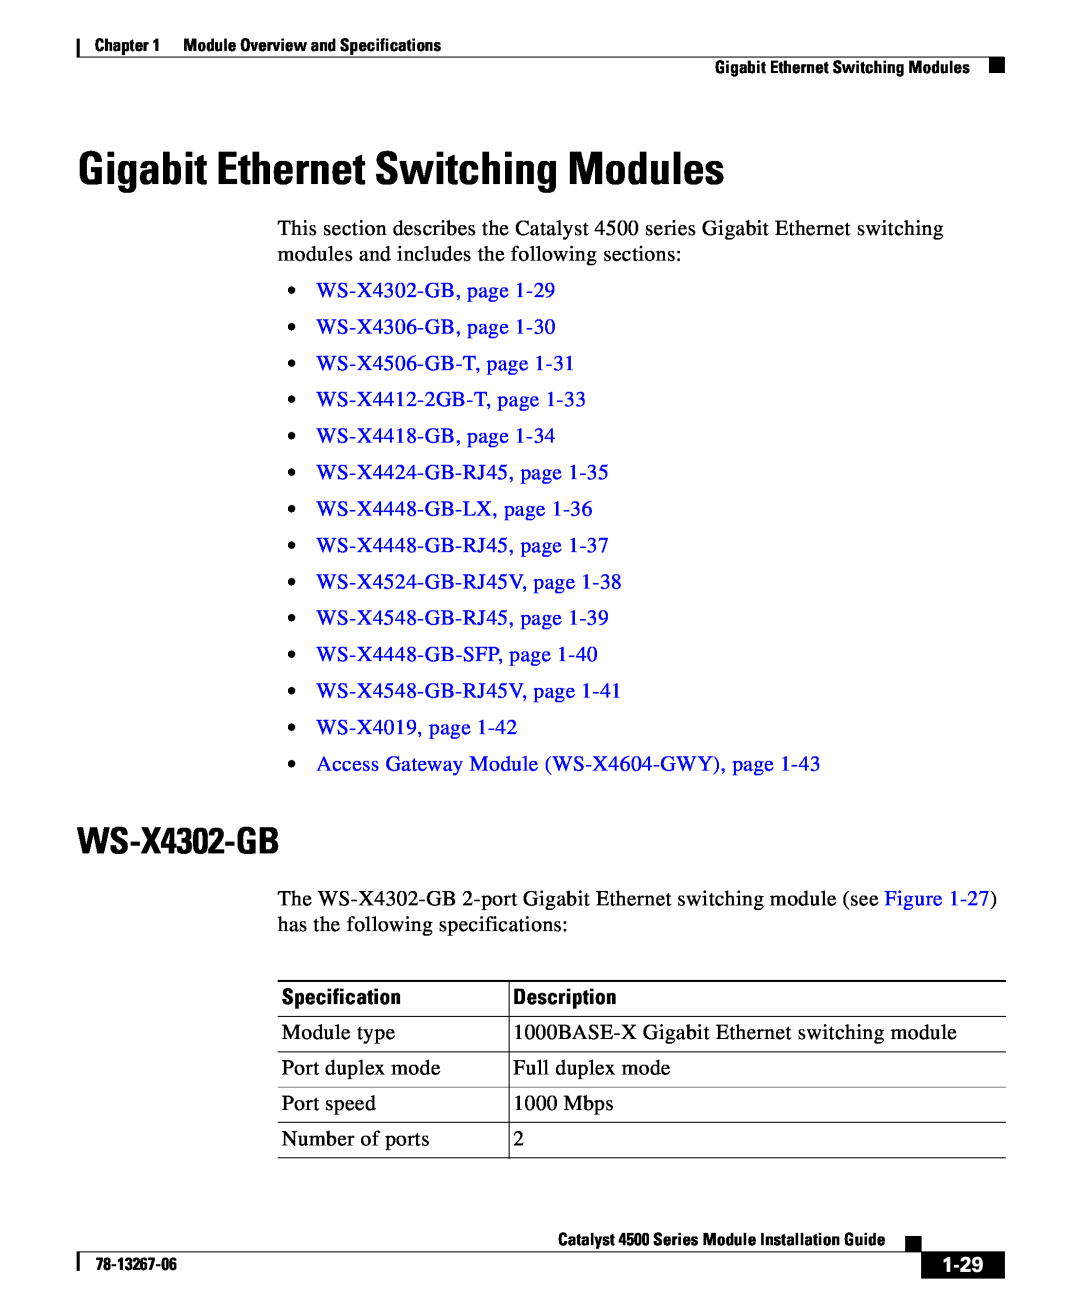 Cisco Systems 4000 specifications Gigabit Ethernet Switching Modules, WS-X4302-GB, 1-29, Specification, Description 